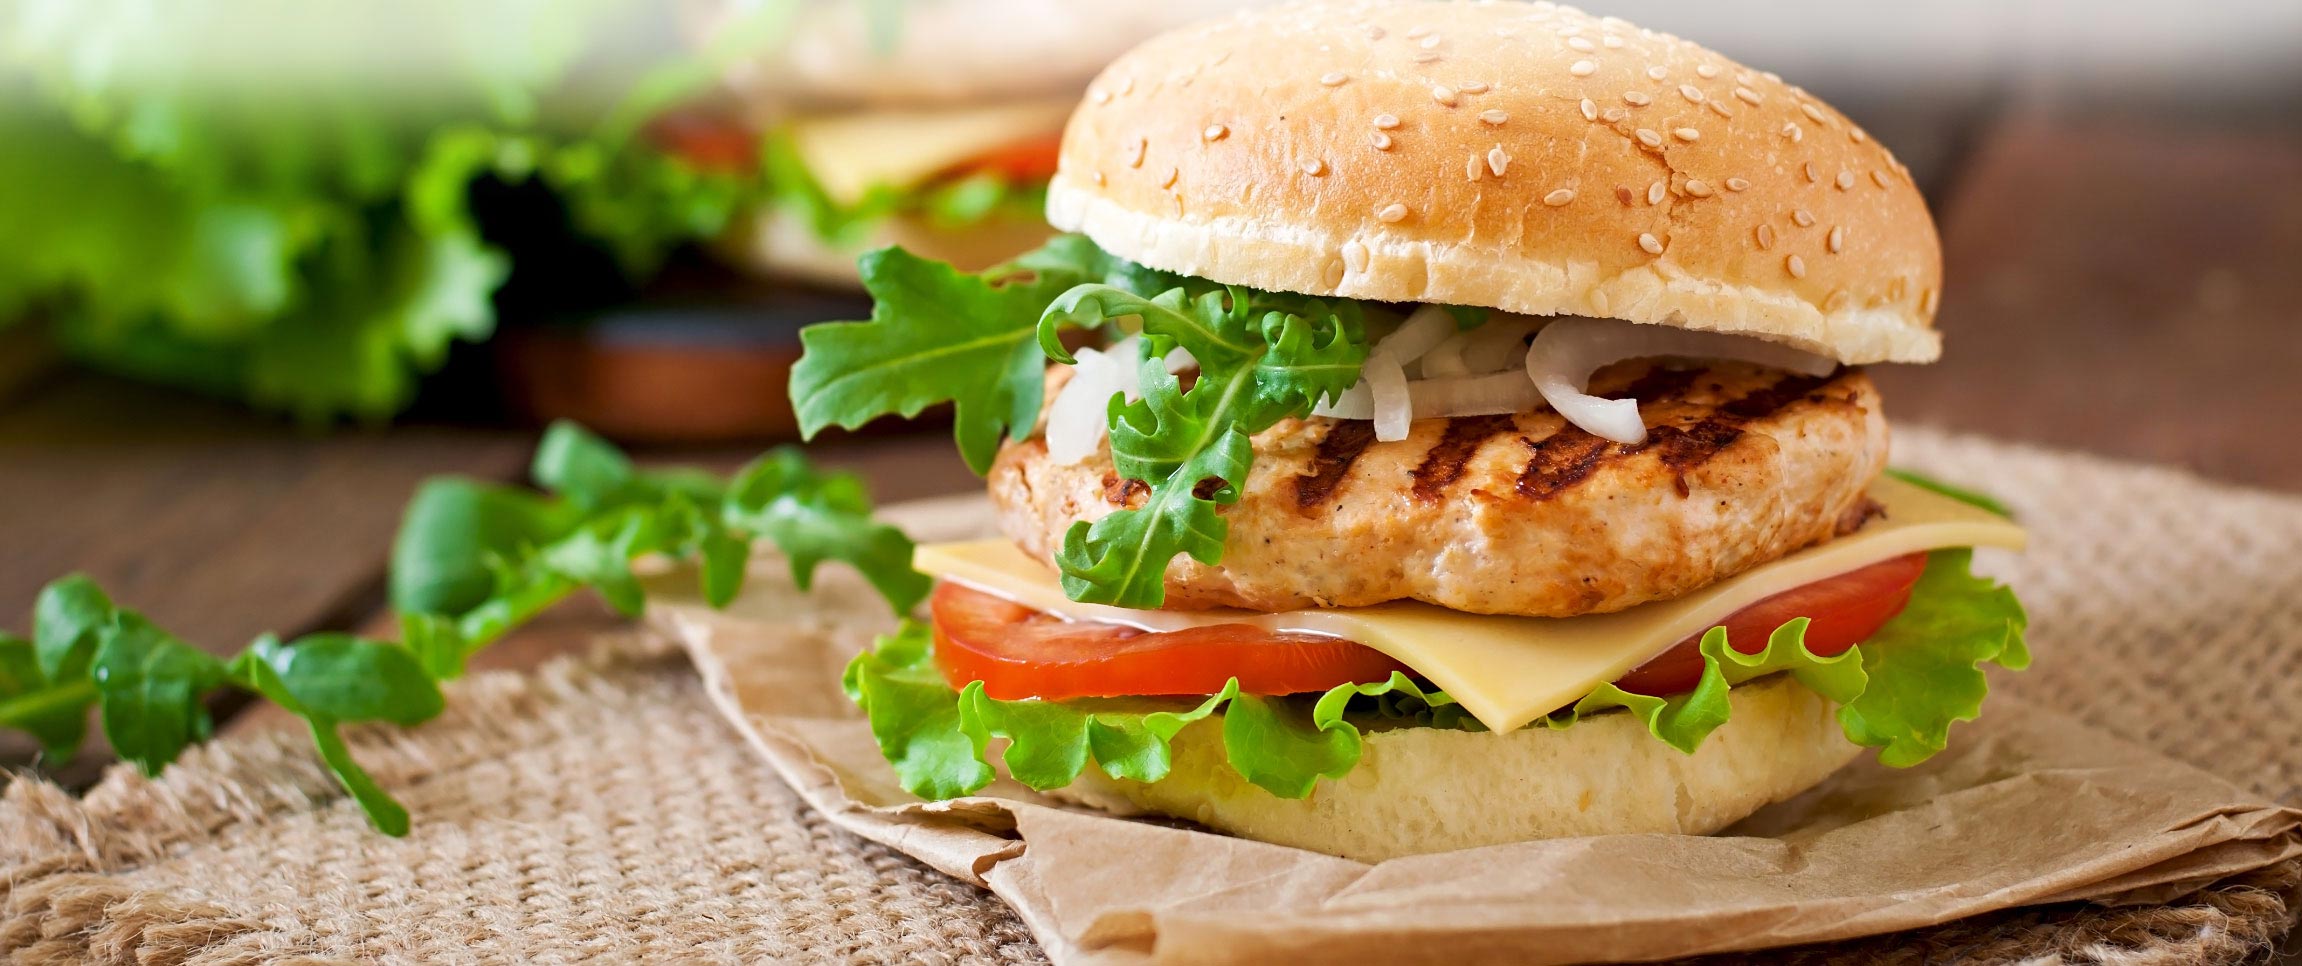 Tips for Turkey and Chicken Burgers